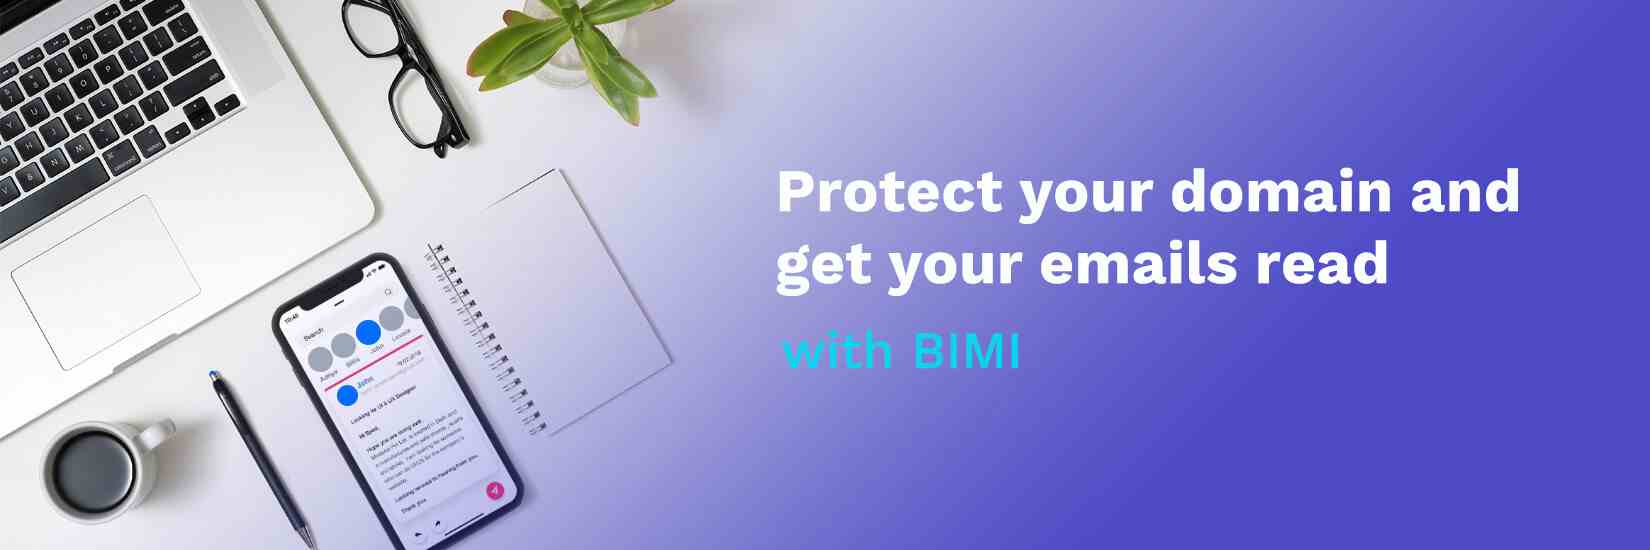 How to Strengthen Your Brand with BIMI